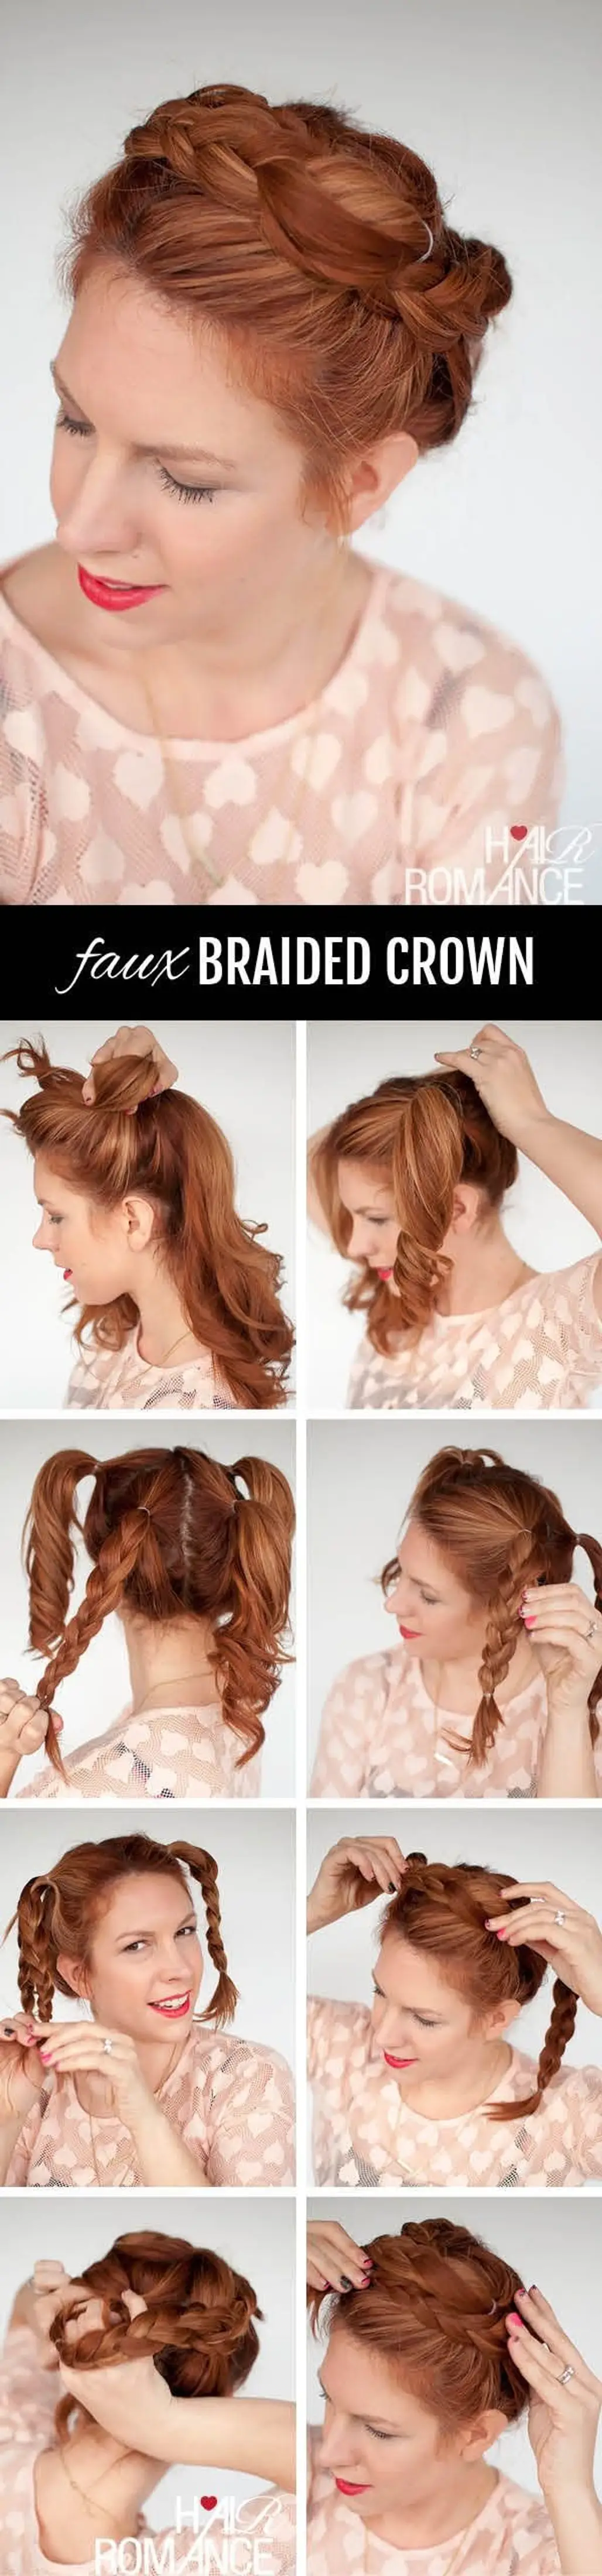 Faux Braided Crown Hairstyle Tutorial